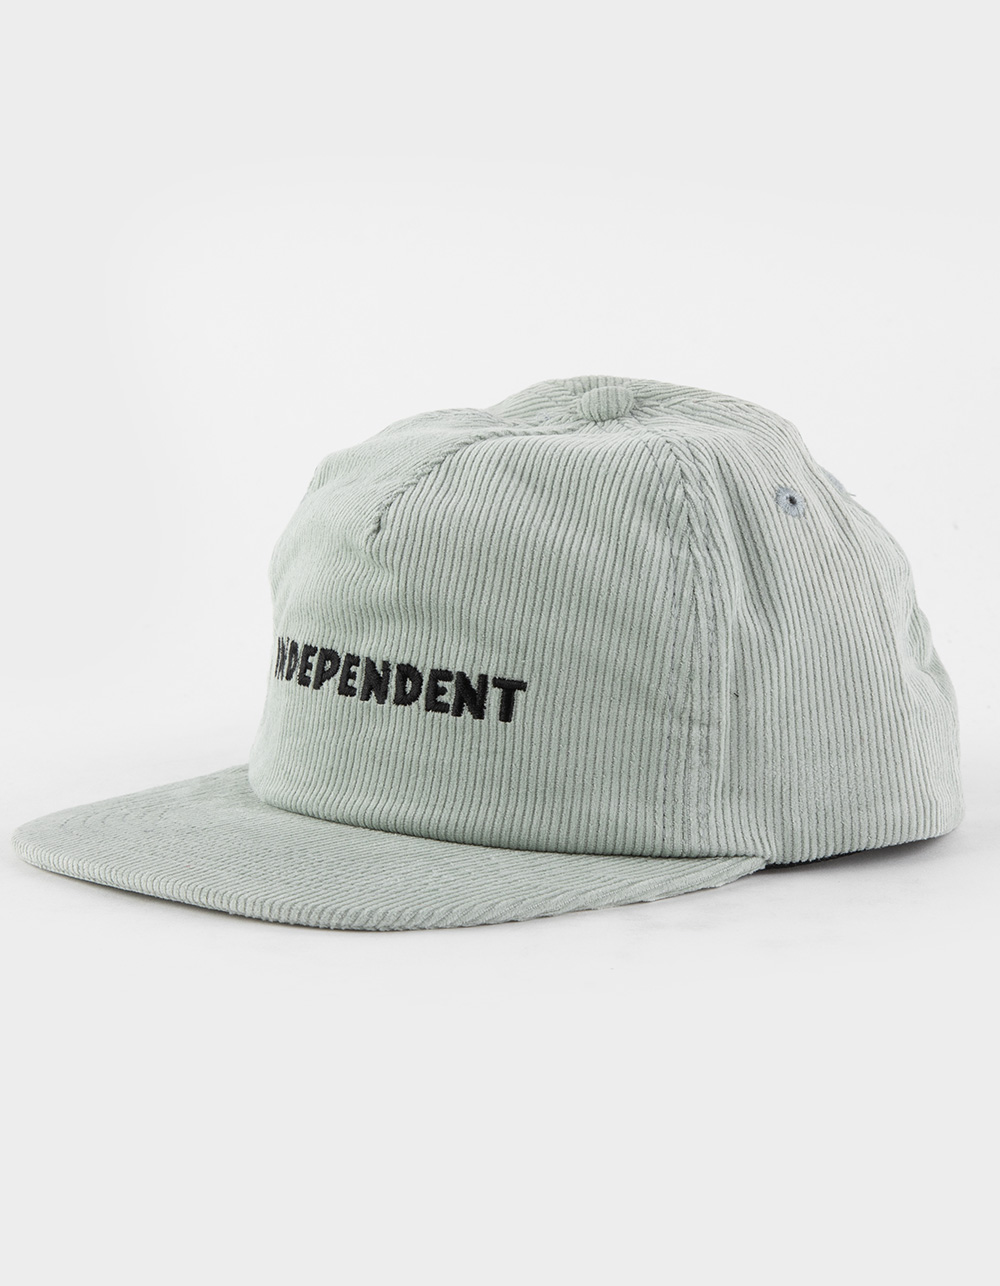 INDEPENDENT Beacon Snapback Hat